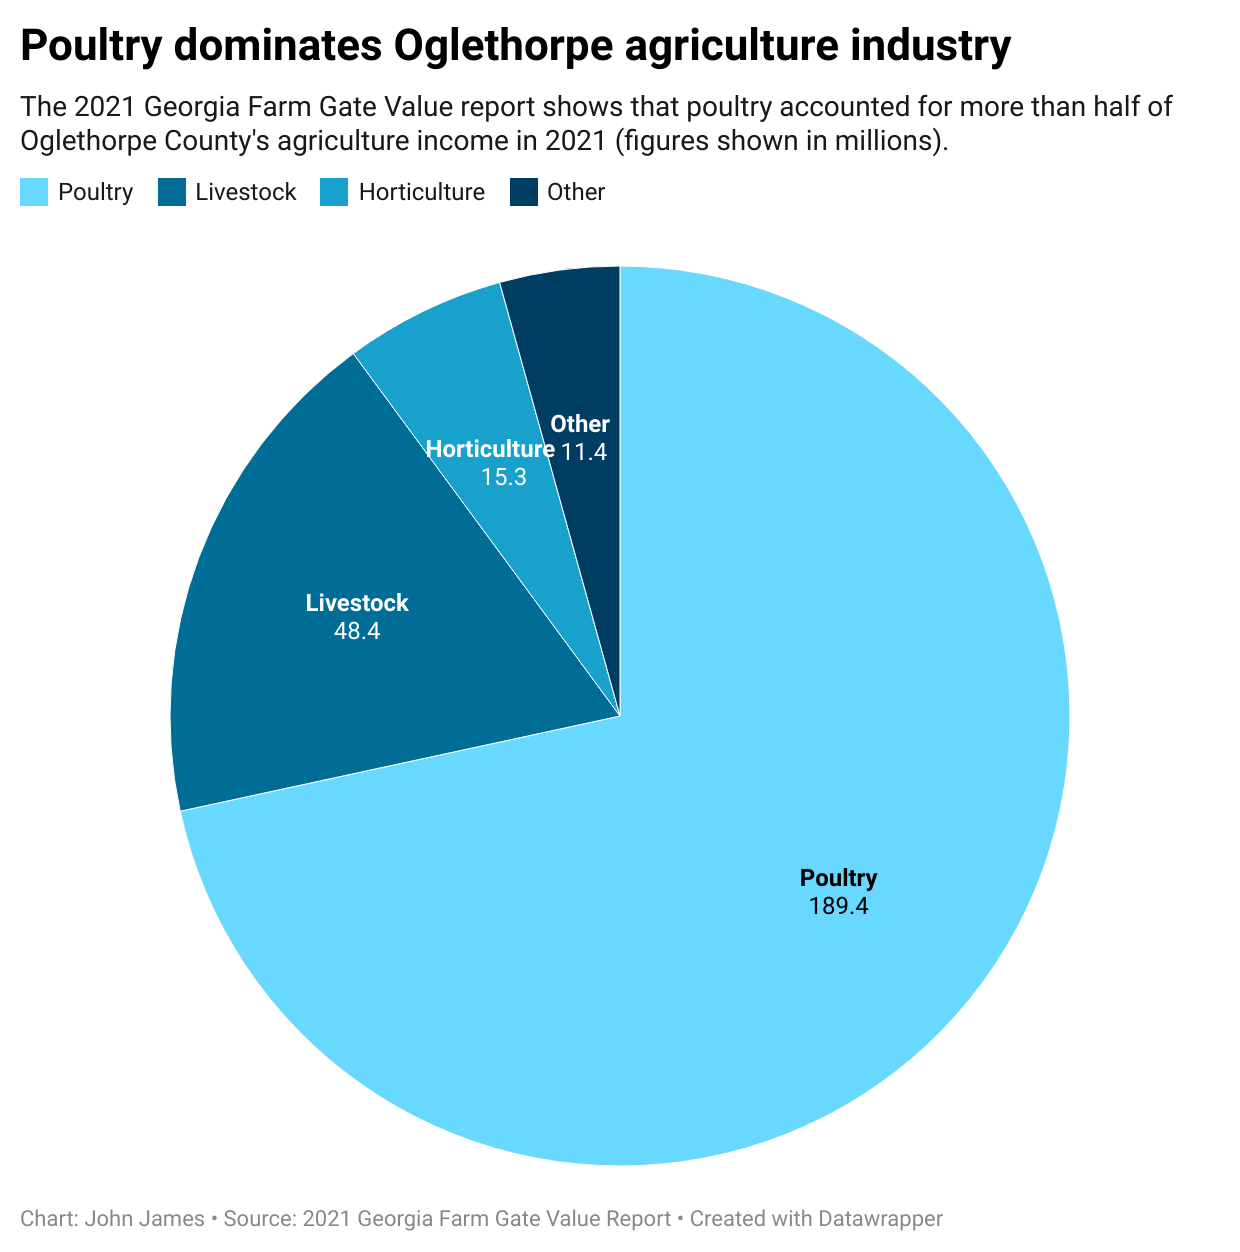 The 2021 Georgia Farm Gate Value report shows that poultry accounted for more than half of Oglethorpe County's agriculture income in 2021 (figures shown in millions).